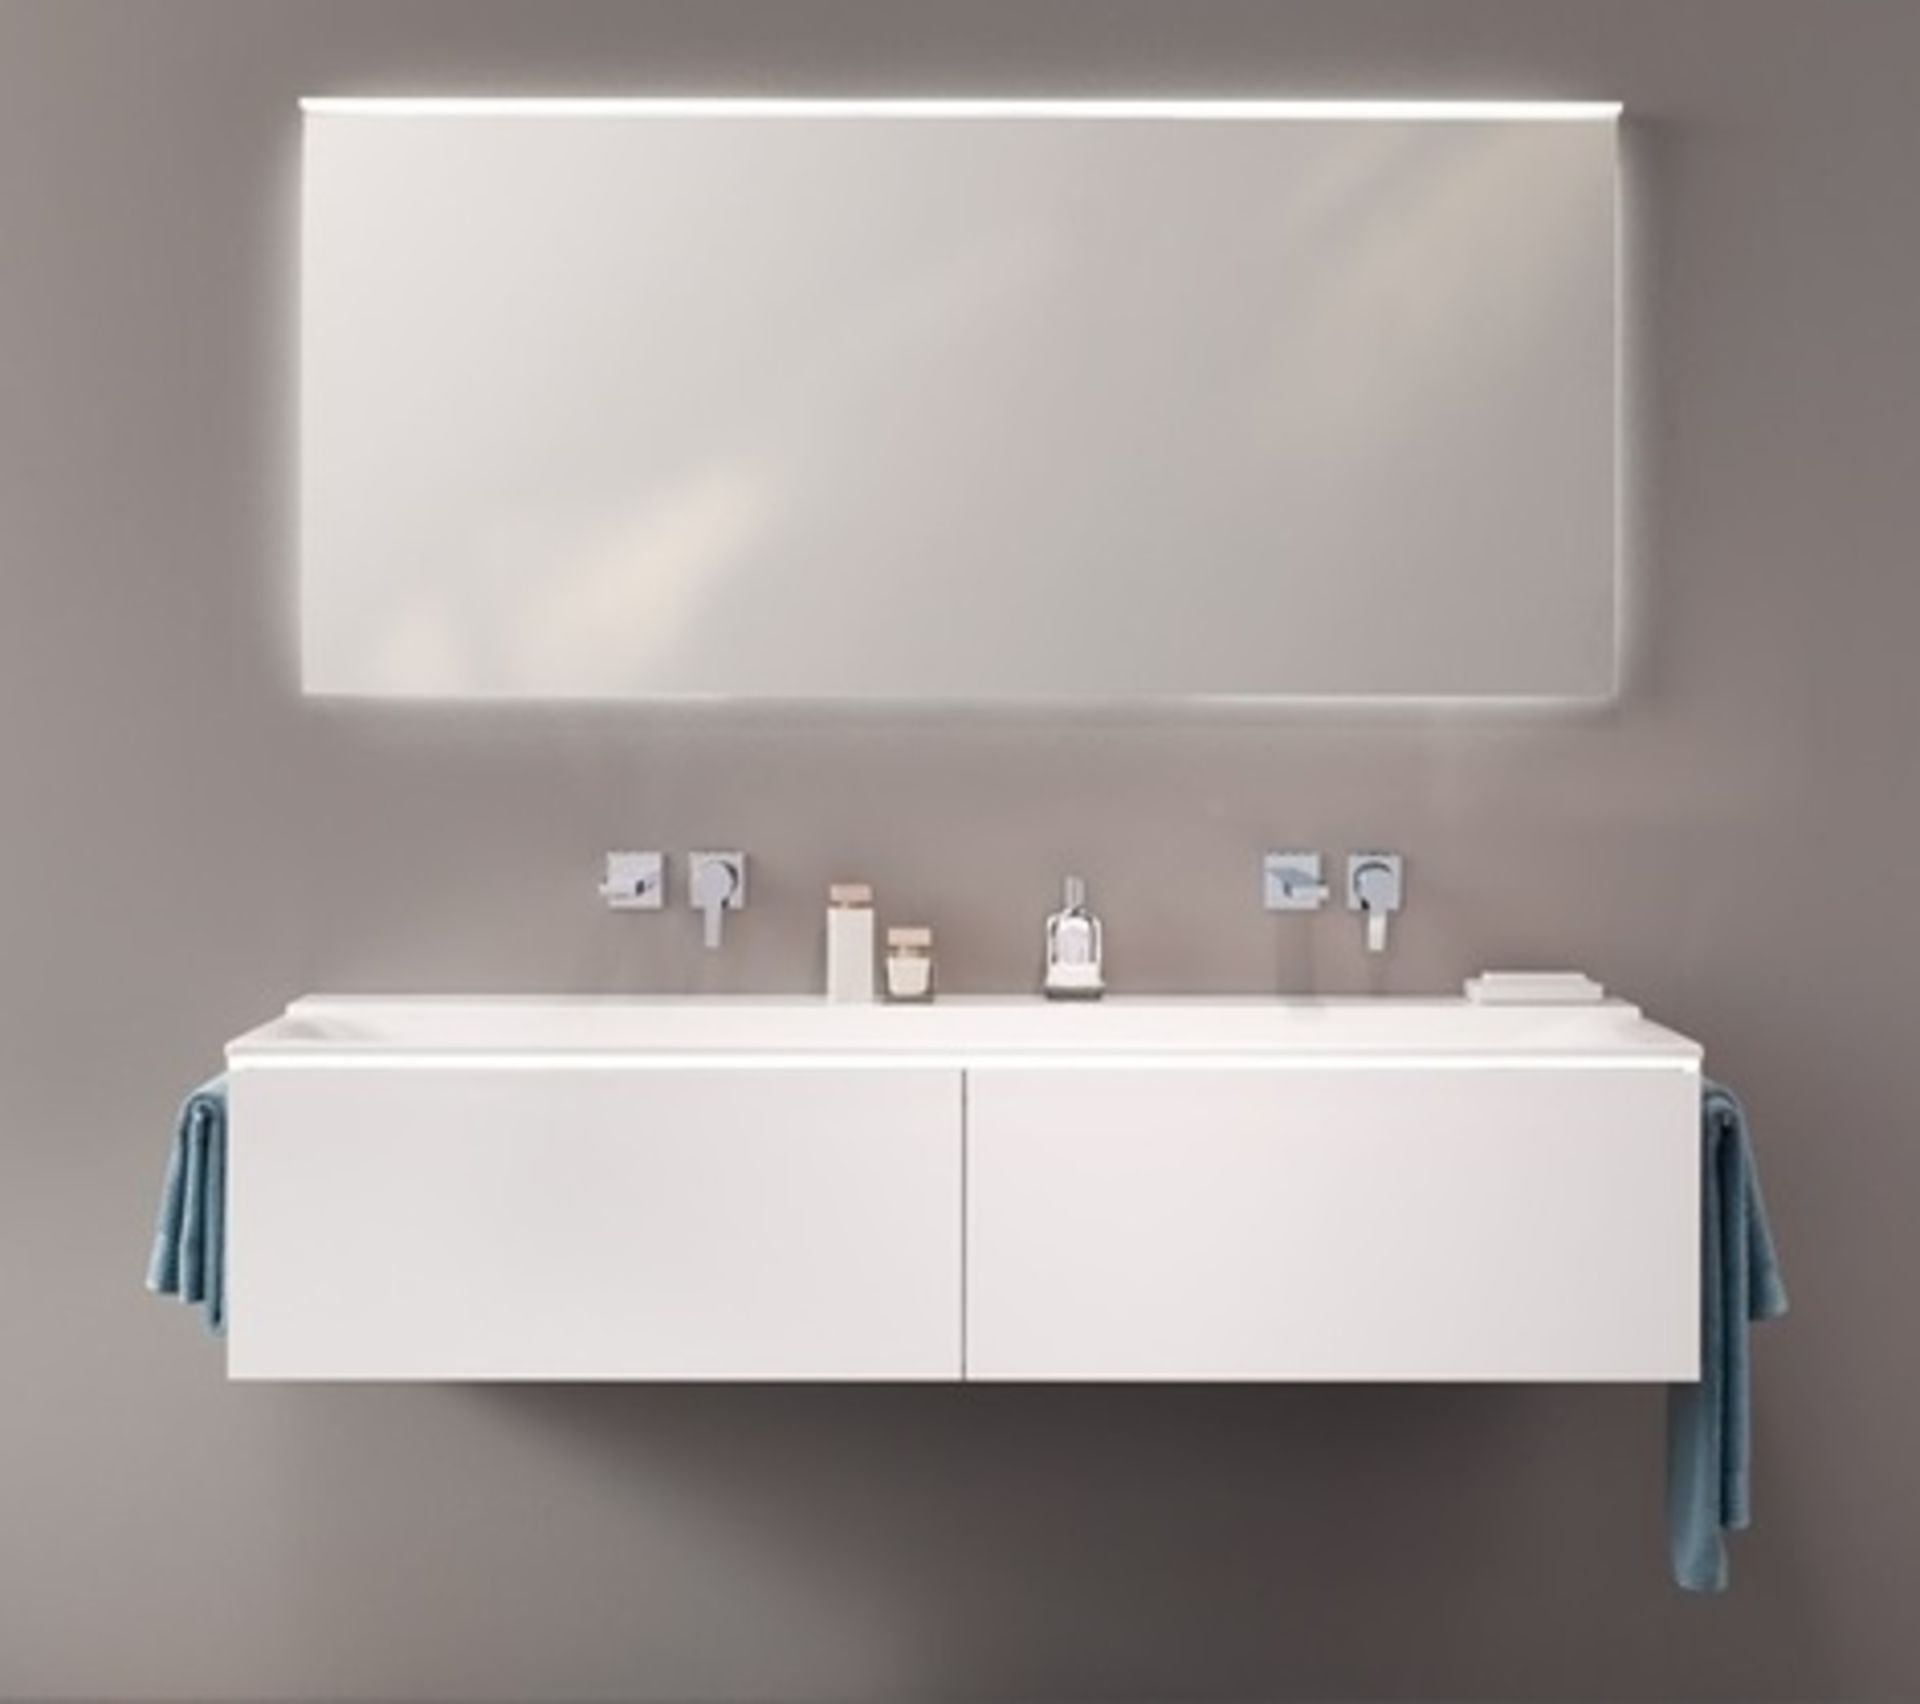 (HM4) Keramag 1395mm Xeno2 White Matt Vanity Unit With 2 Drawers. RRP £1,980.16. Comes complet...